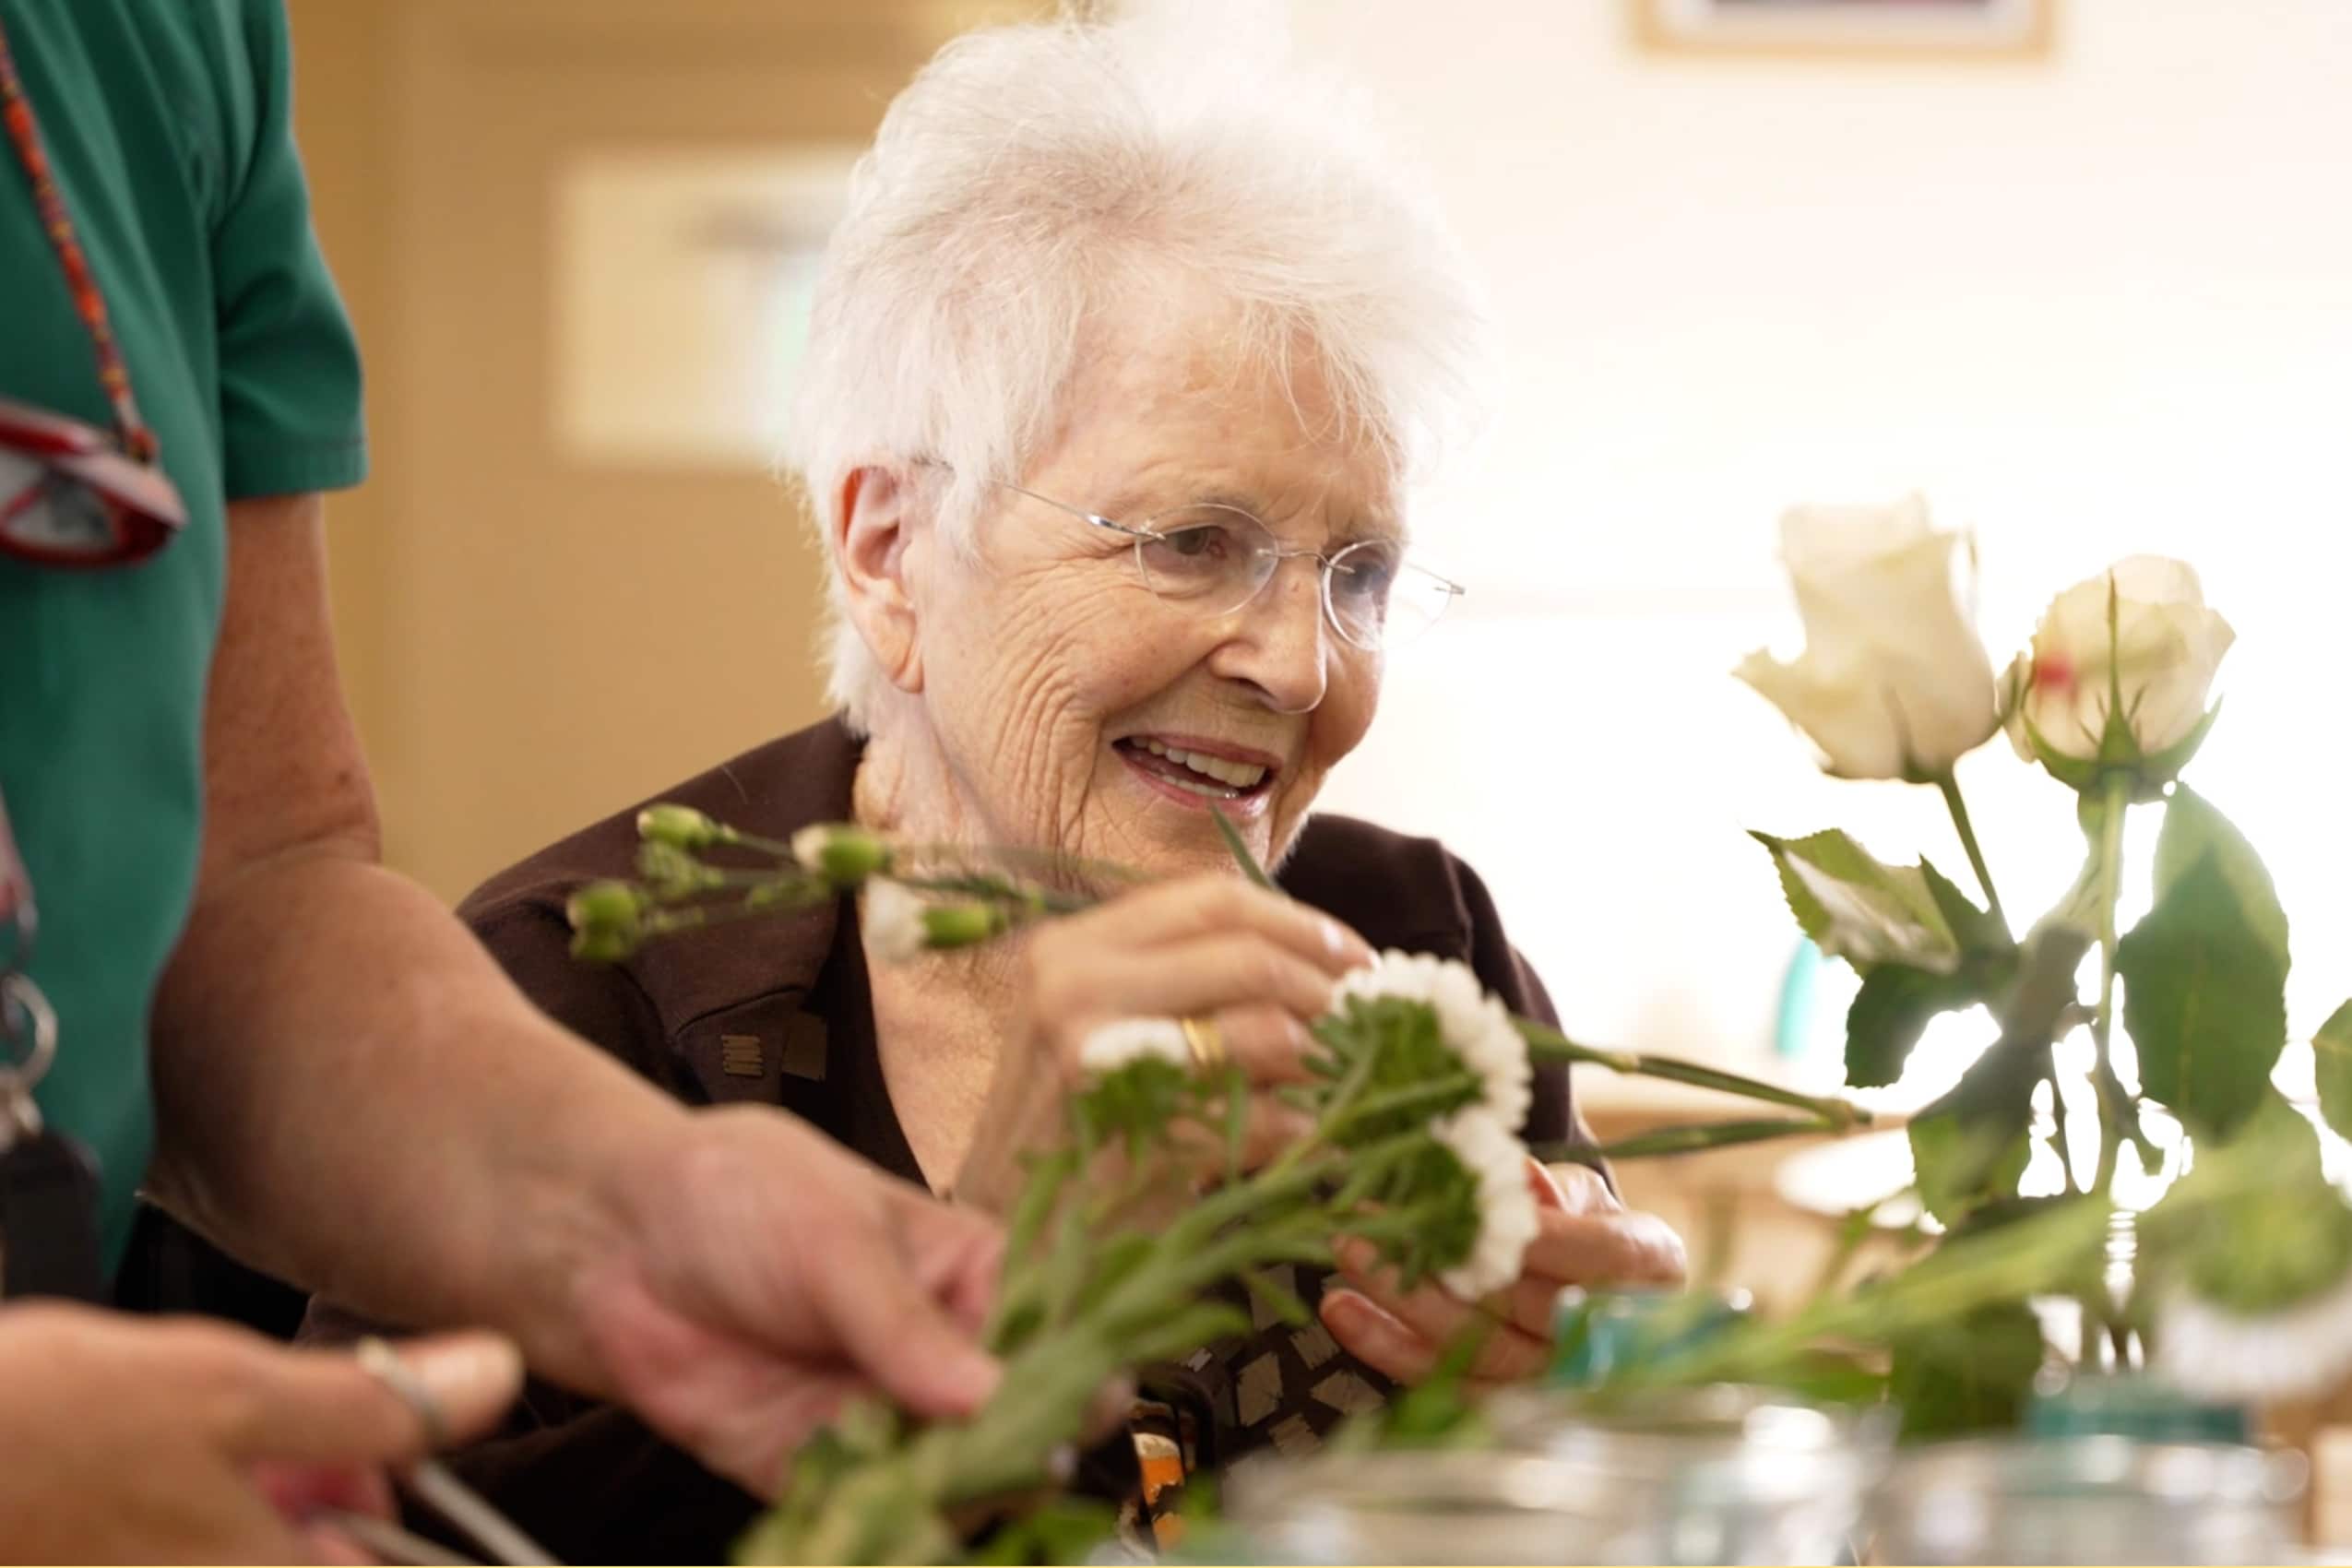 A resident of Muirton House Care Home in Blairgowrie taking part in a group flower arranging activity.